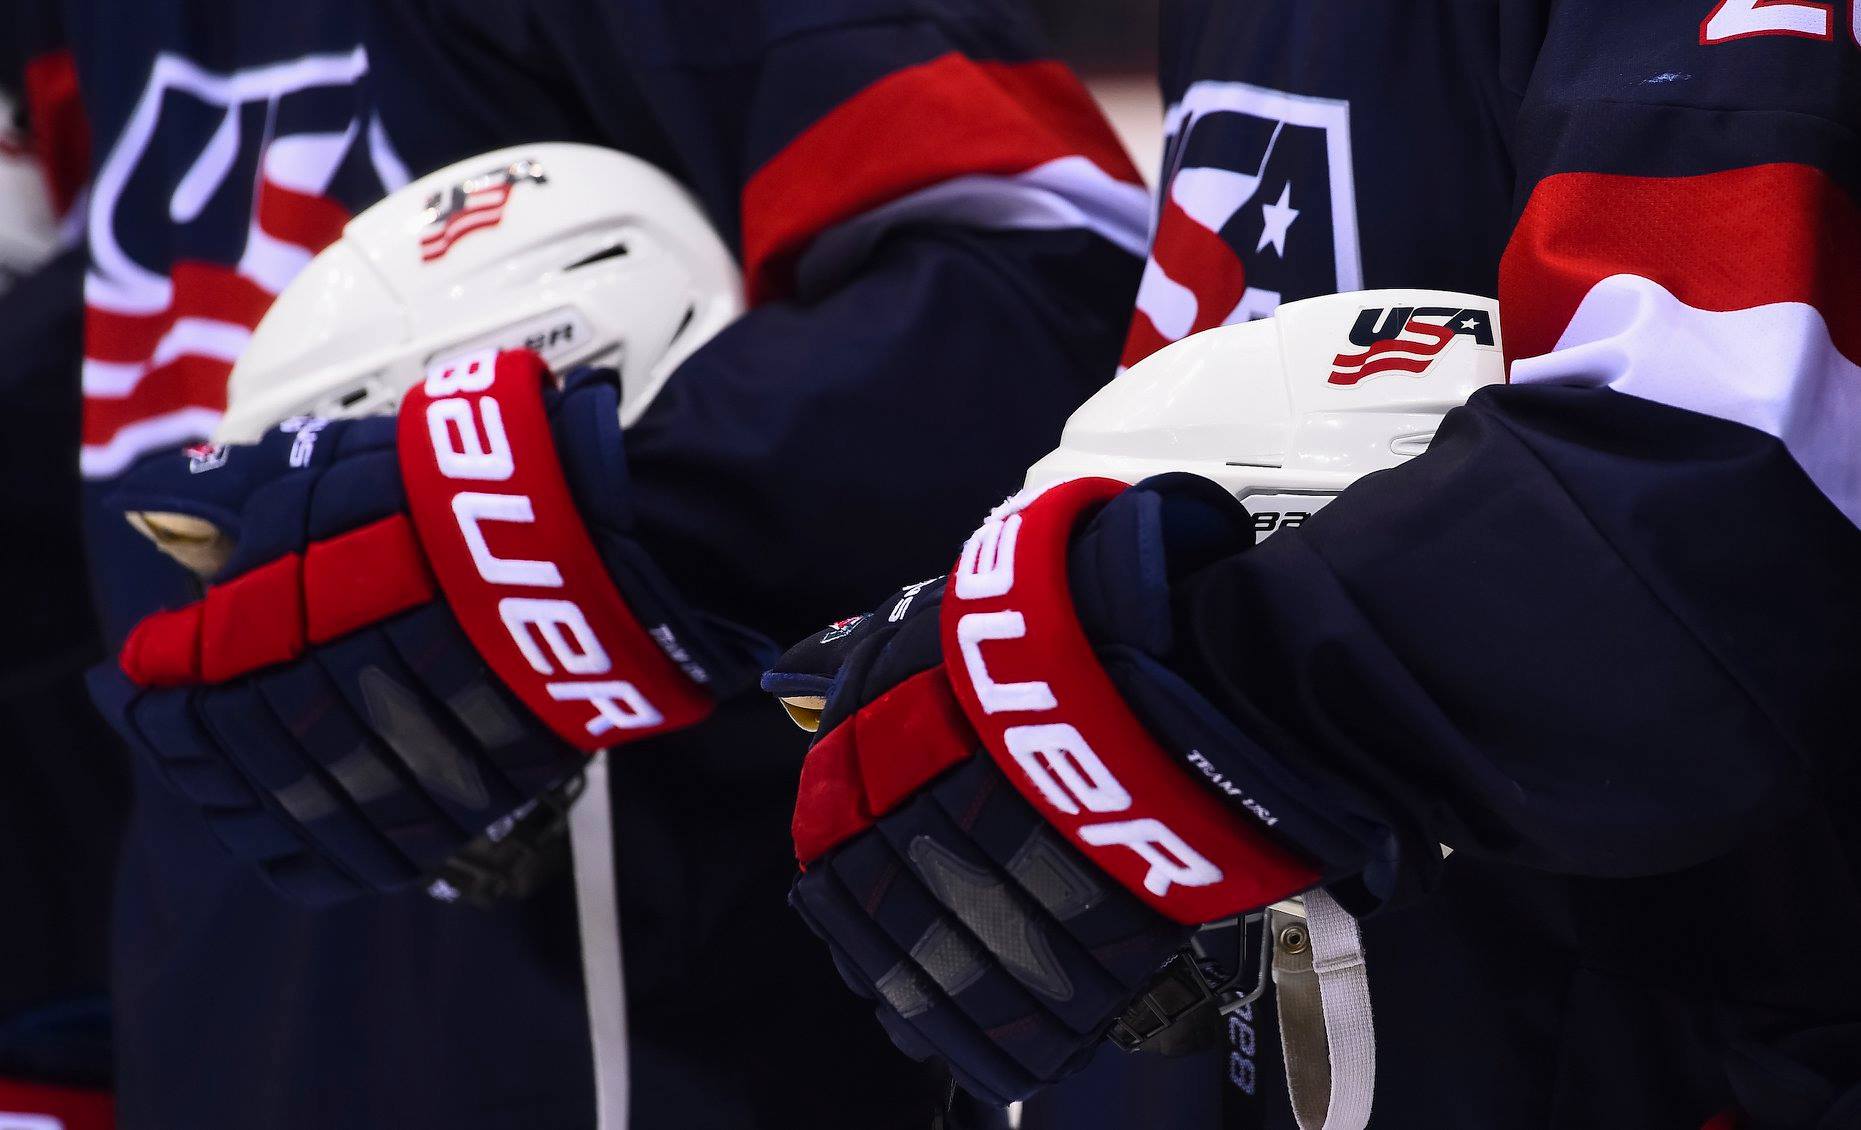 Team USA's hockey goalie masks face hurdles to create 'special' ones